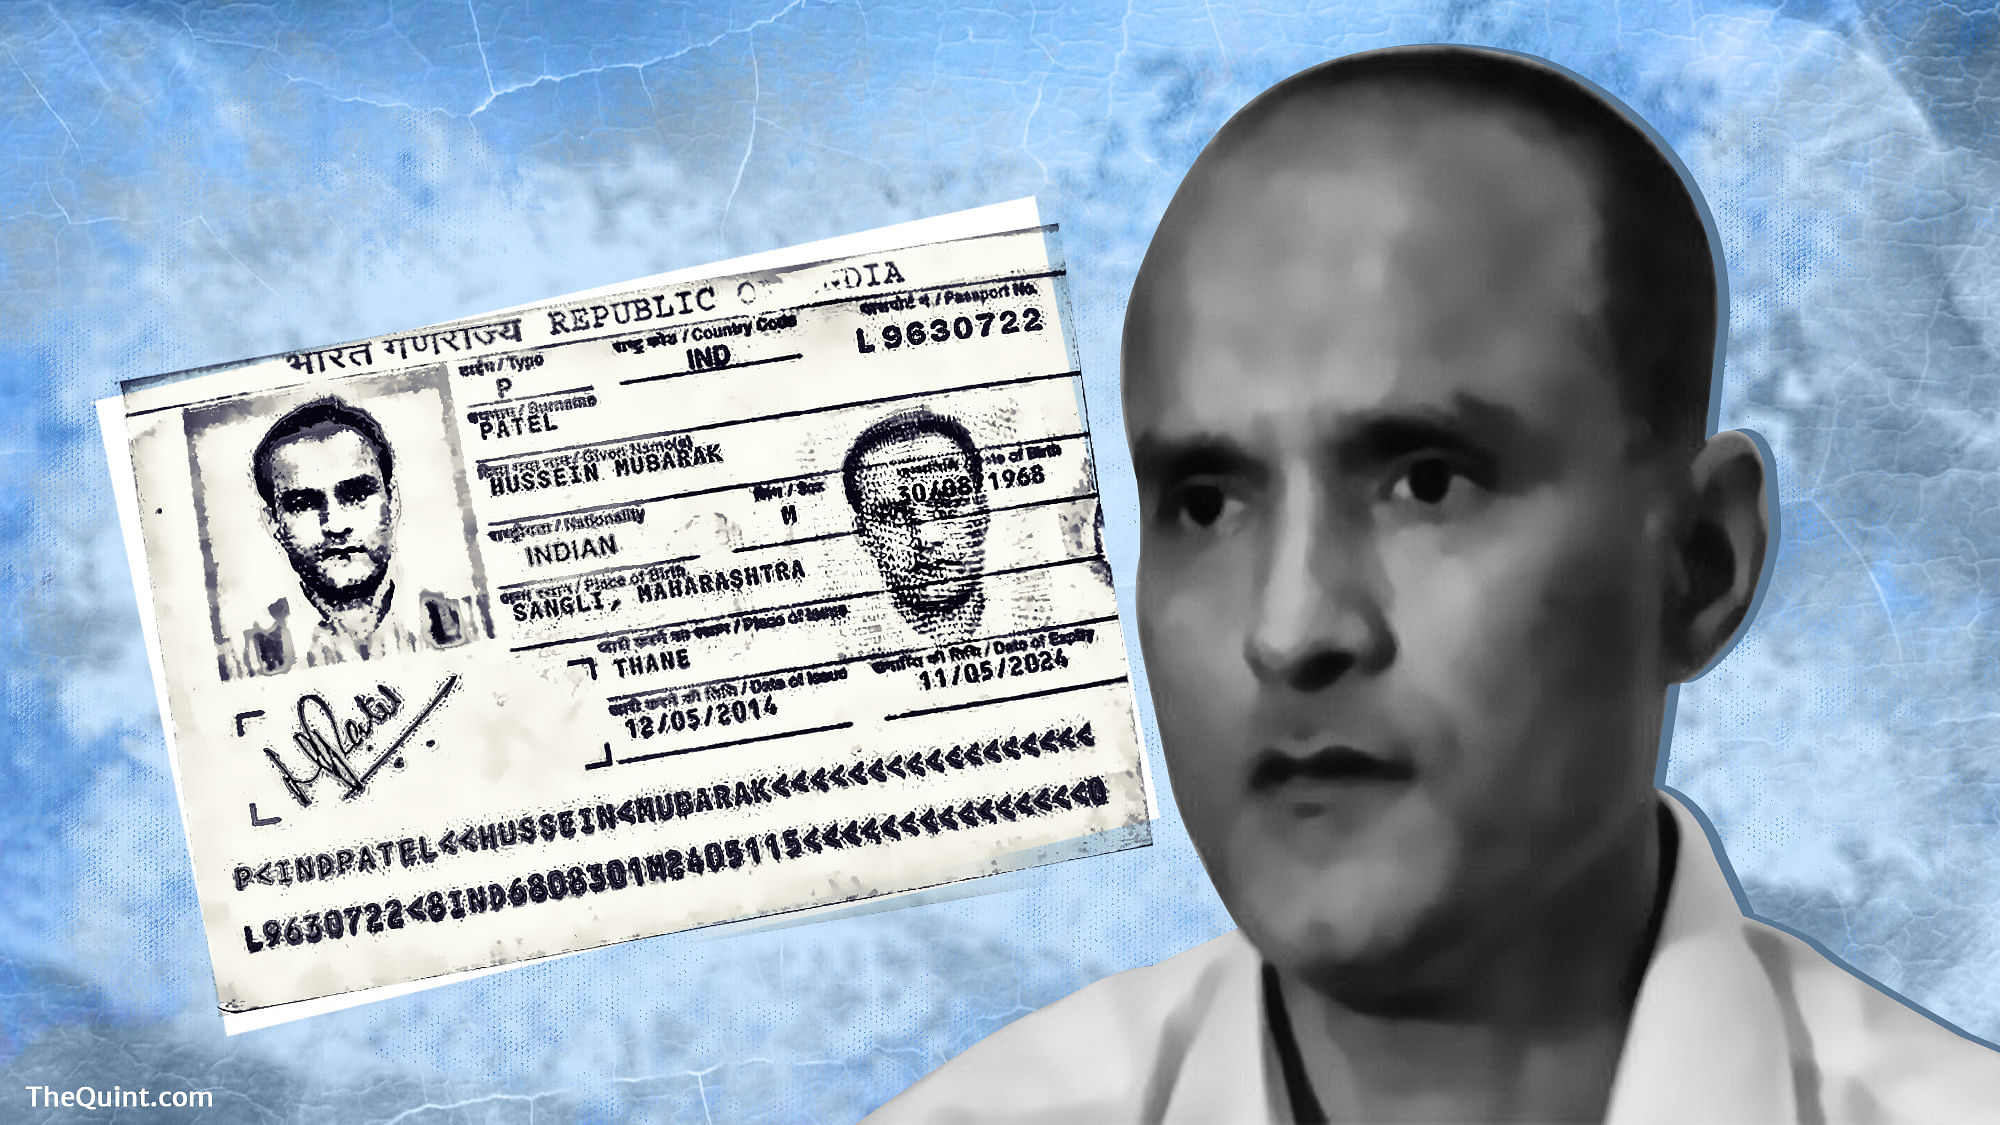 Kulbhushan Jadhav, who Islamabad claims is an Indian spy, has been sentenced to death by a Pakistani military court. (Photo: <b>The Quint</b>)